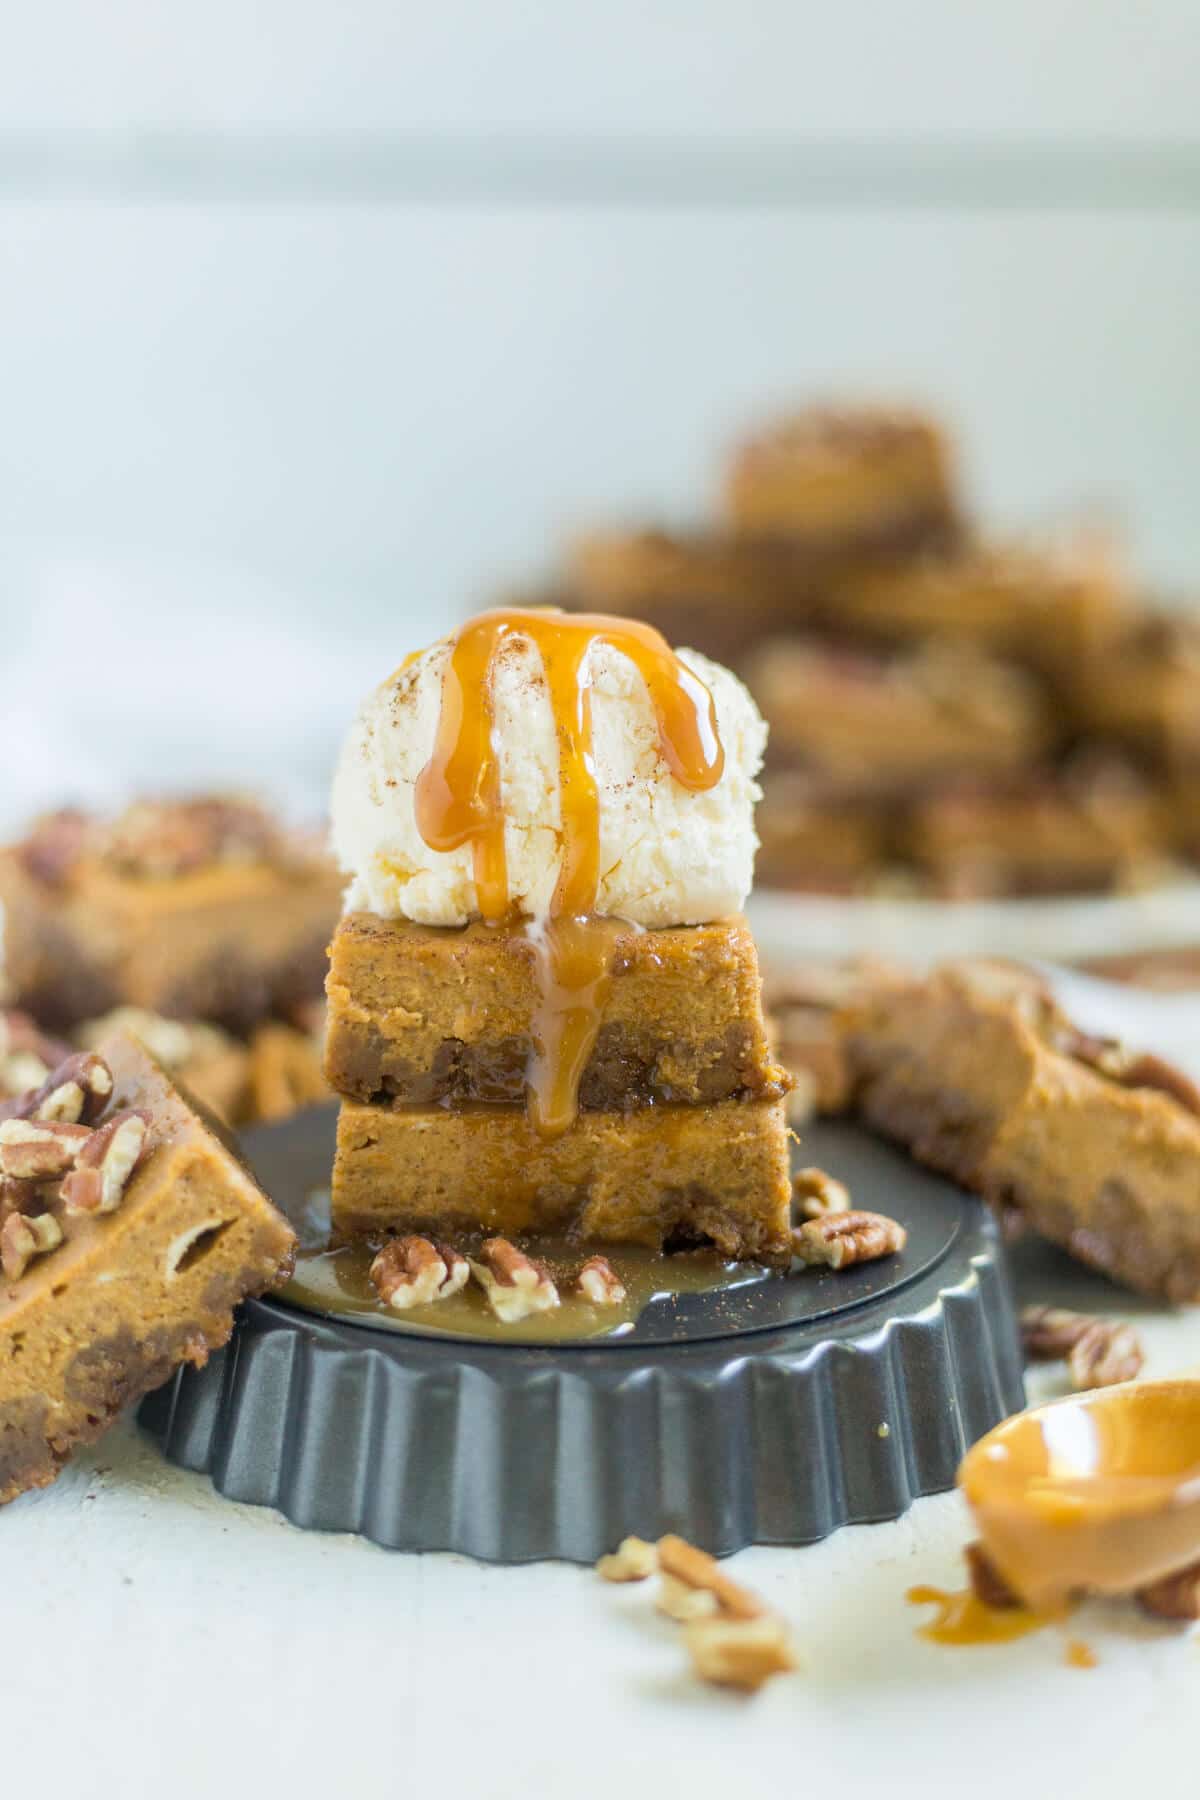 Pumpkin pie bars are a fun twist on a classic Thanksgiving recipe! The crust is made from crushed gingerbread and the bars are just like pumpkin pie and topped with pecans, caramel, ice cream and more!